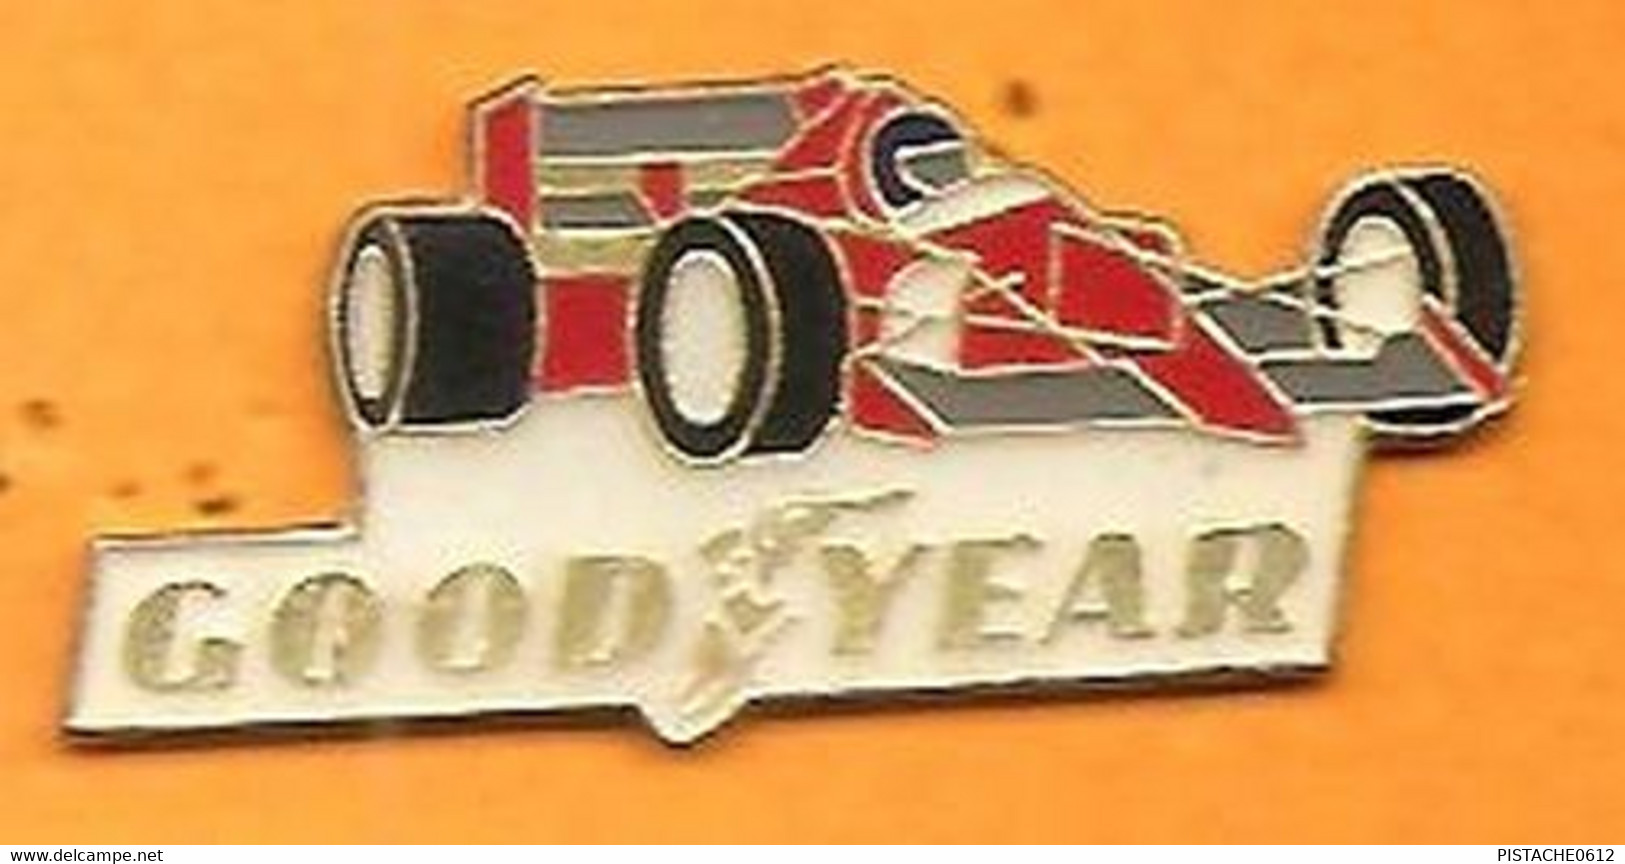 Pin's Good Year F1 Voiture De Course Signé Sauvagine - F1